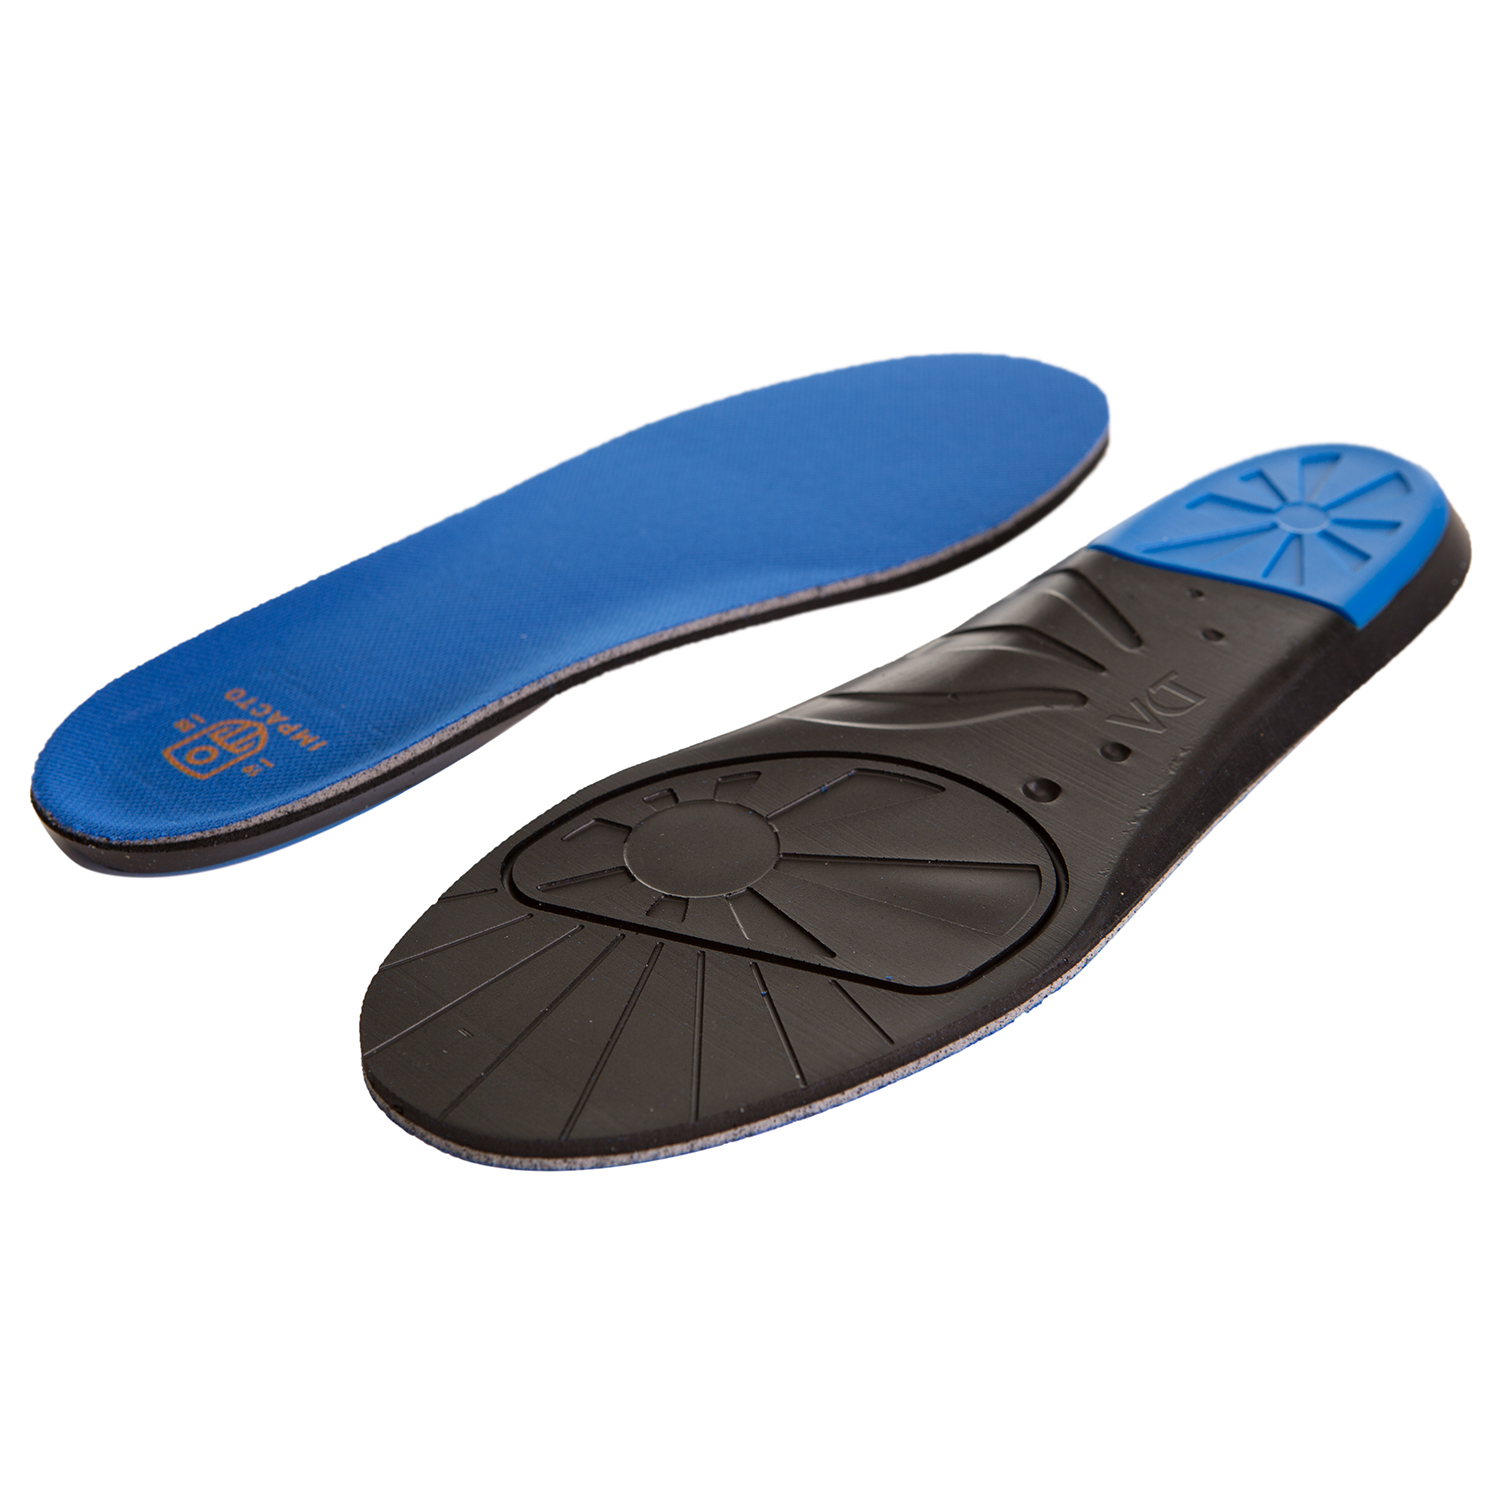 IMPACTO CUSHNSTEP MOLD INSOLE FATIGUE G M11-12.5 - Insoles